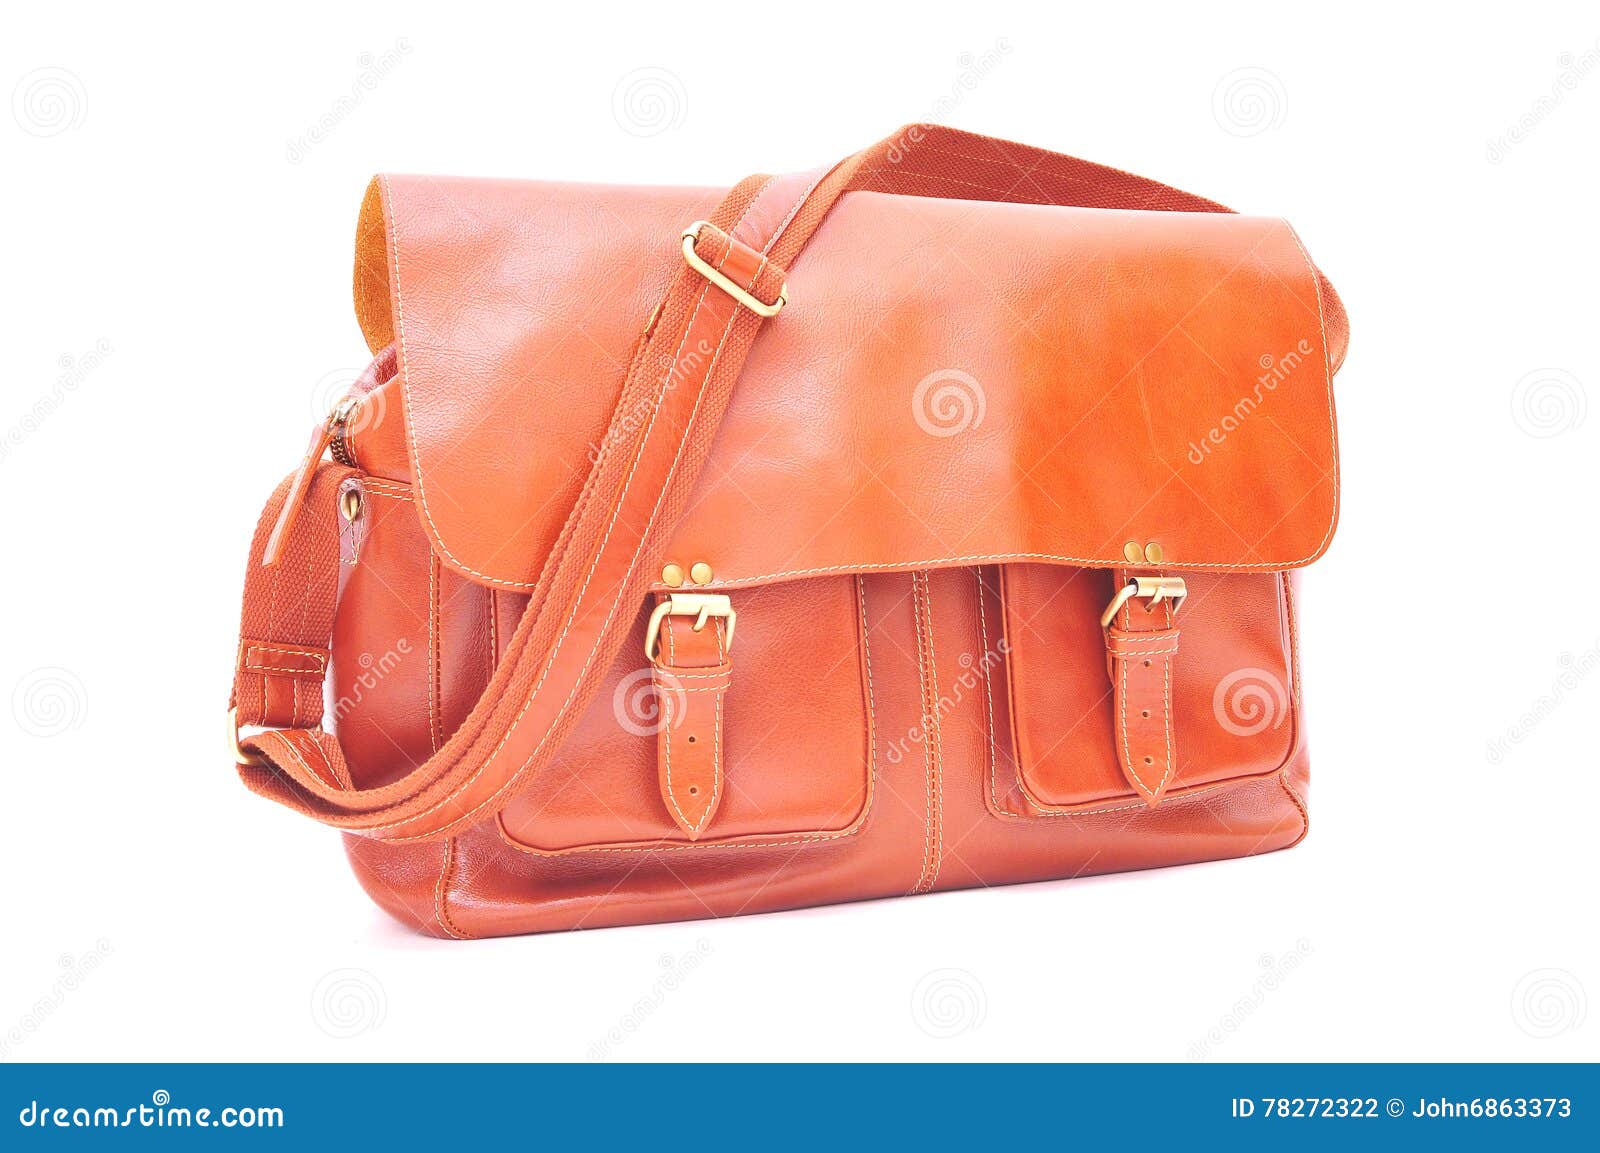 Brown Leather handbag stock photo. Image of concept, clipping - 78272322